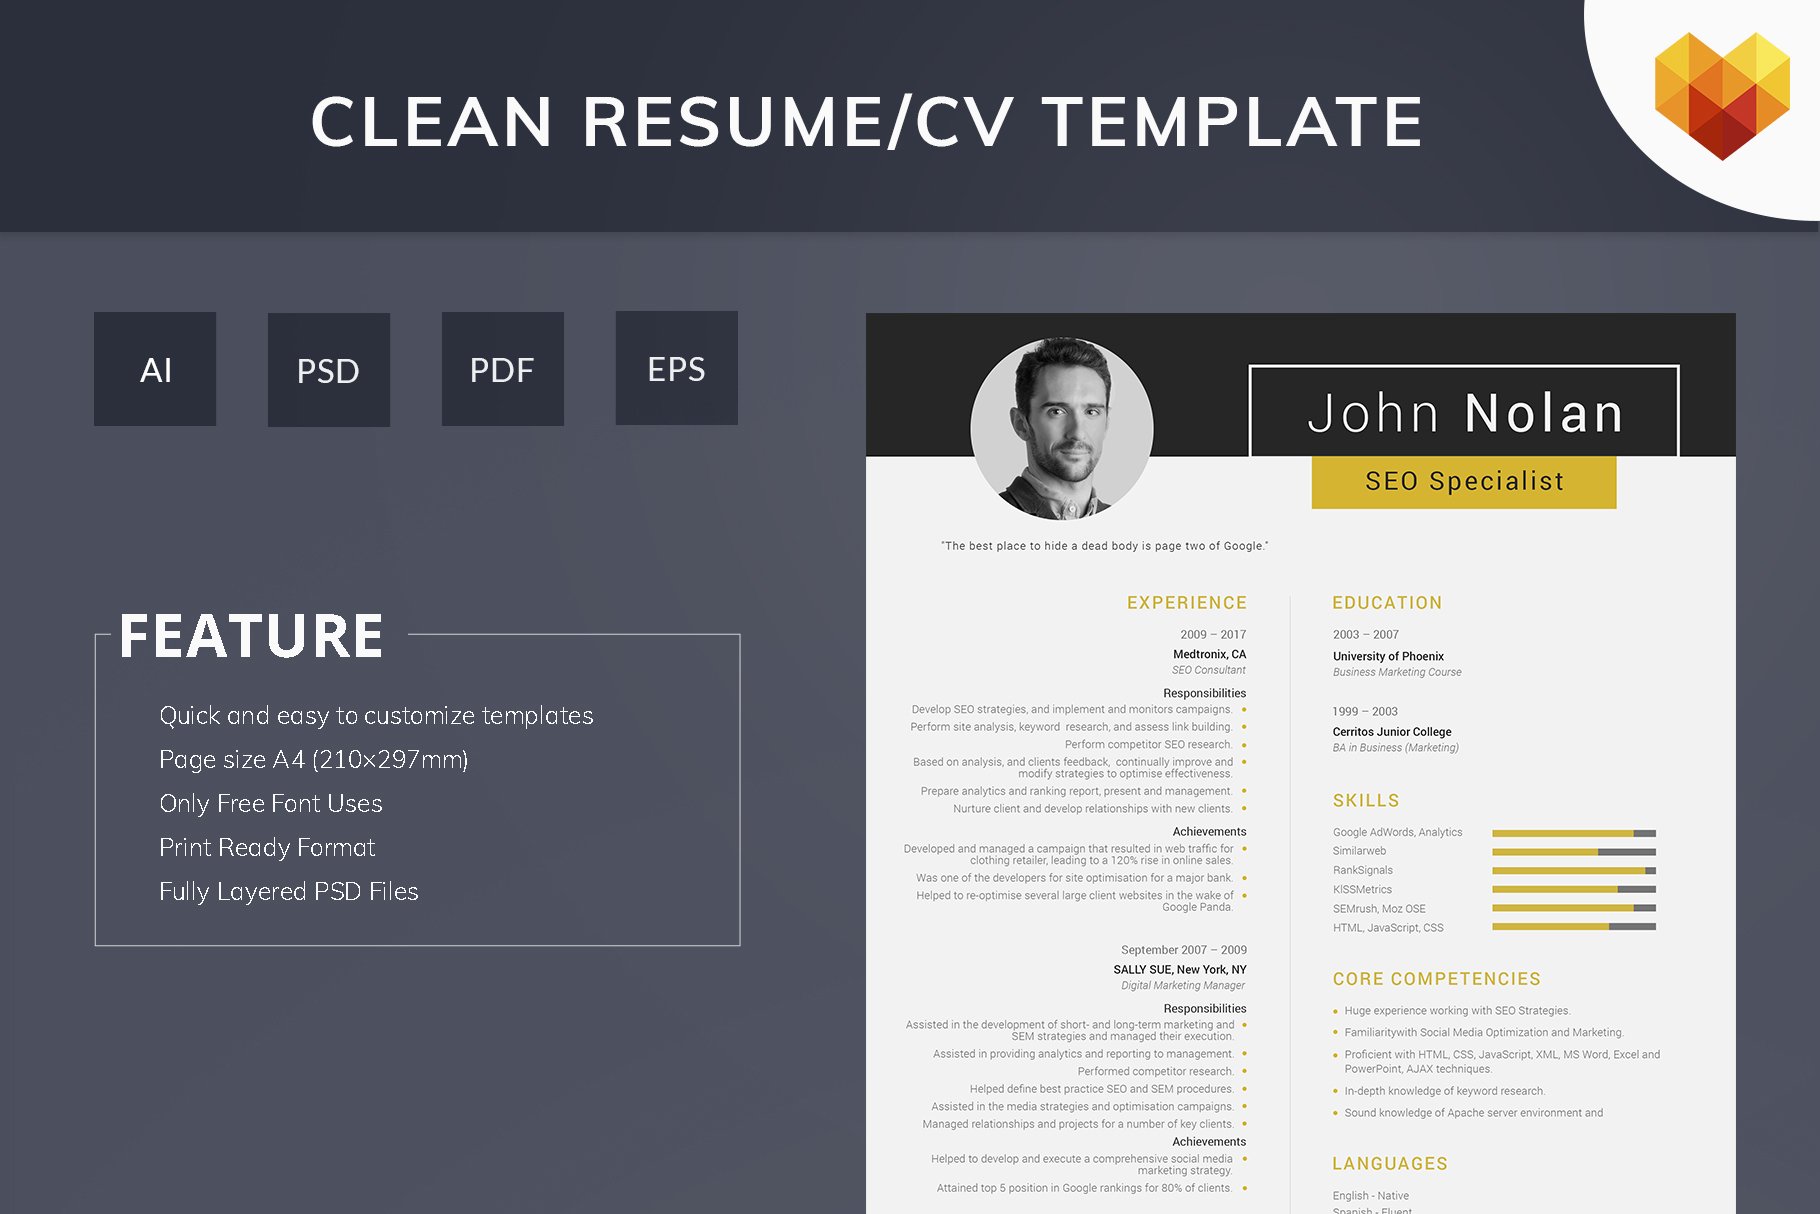 Printable Resume for SEO Specialist cover image.